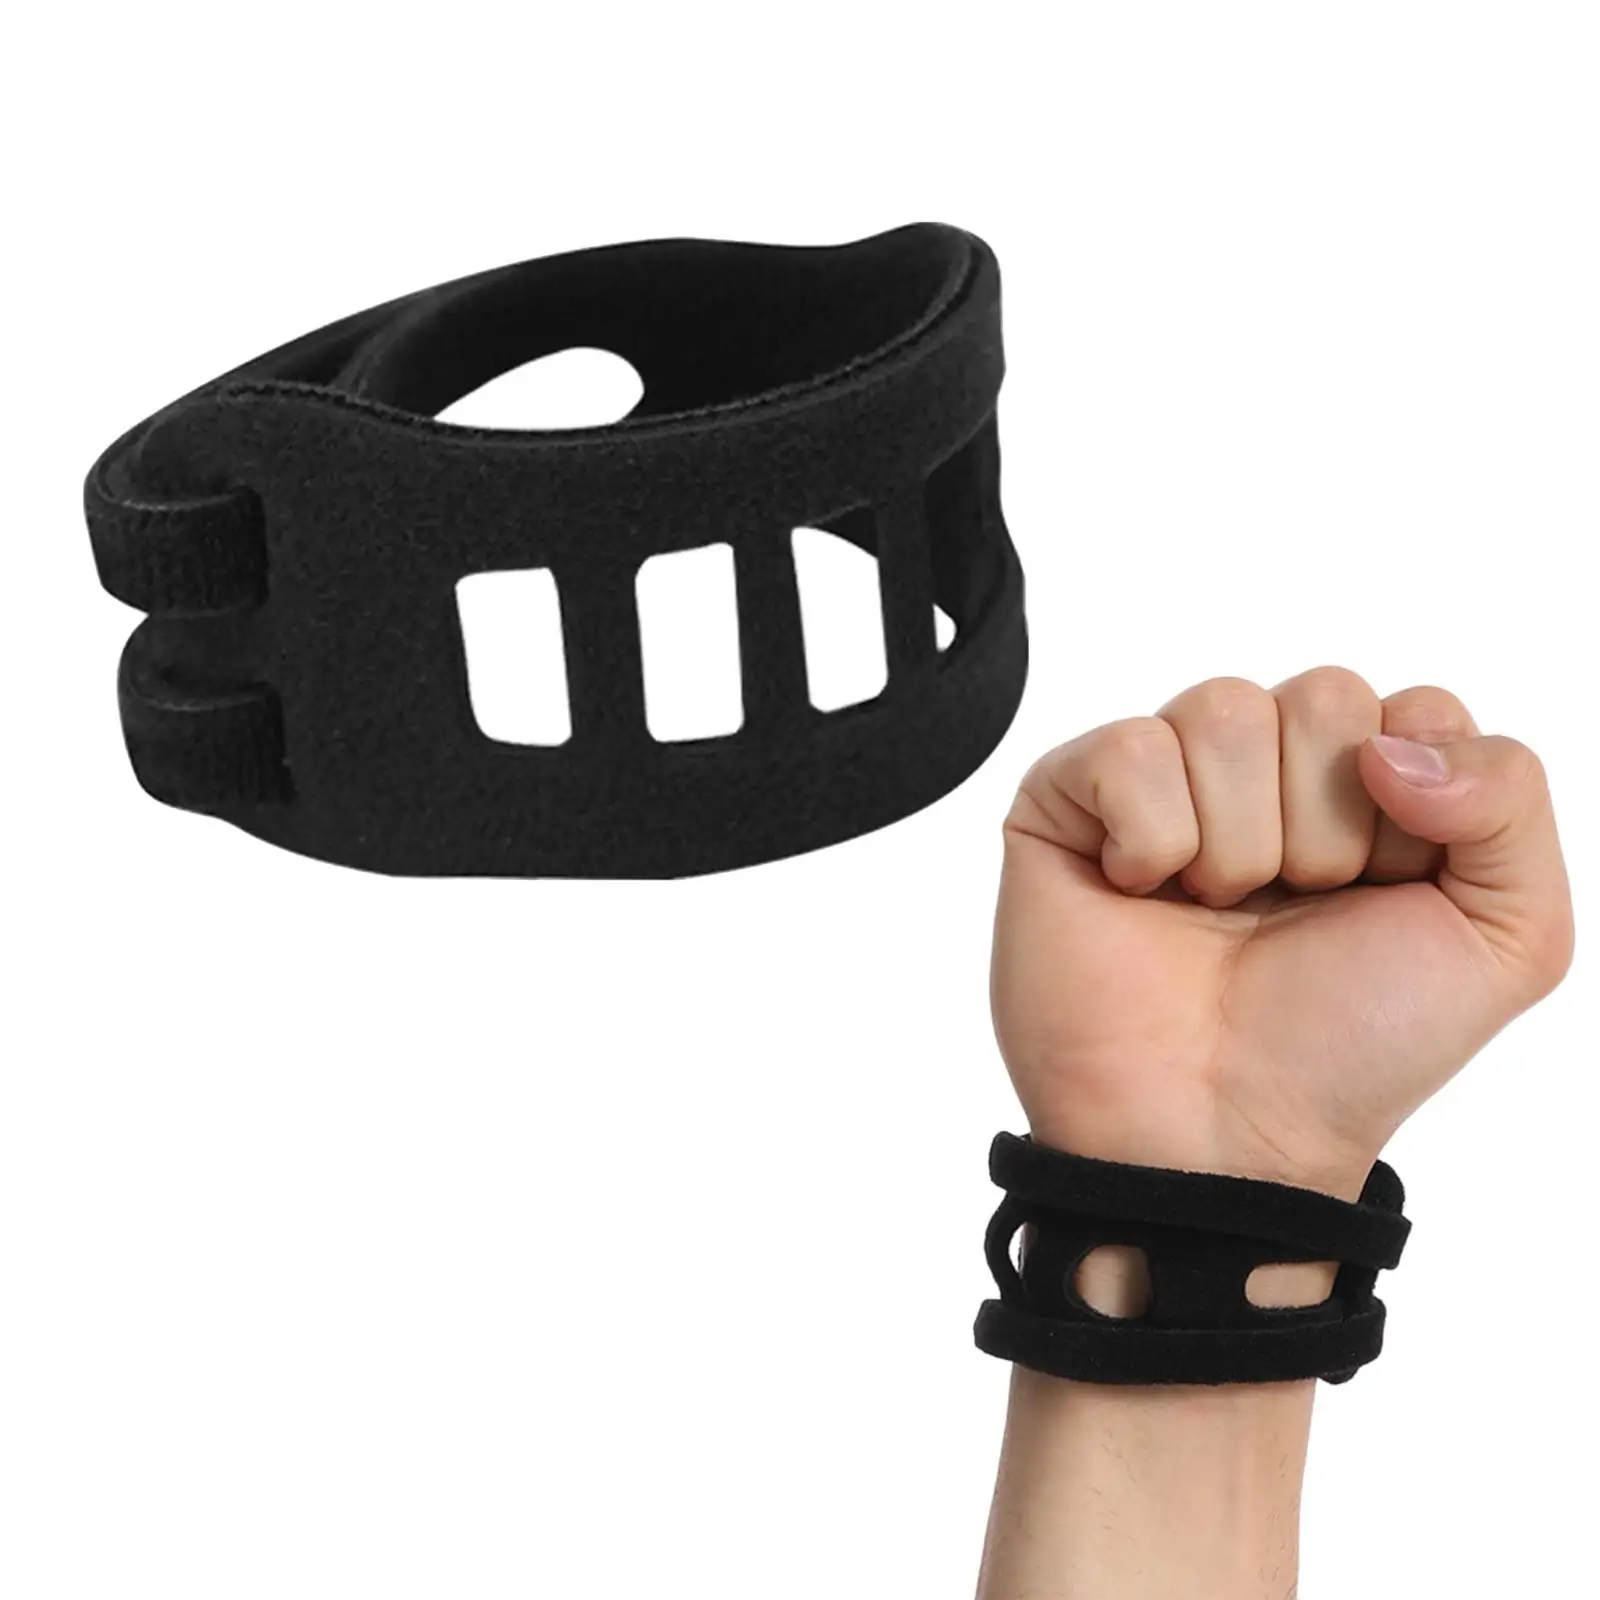 Tfcc Wrist Brace Breathable Straps for Fitness Weight Bearing Working Out Sports